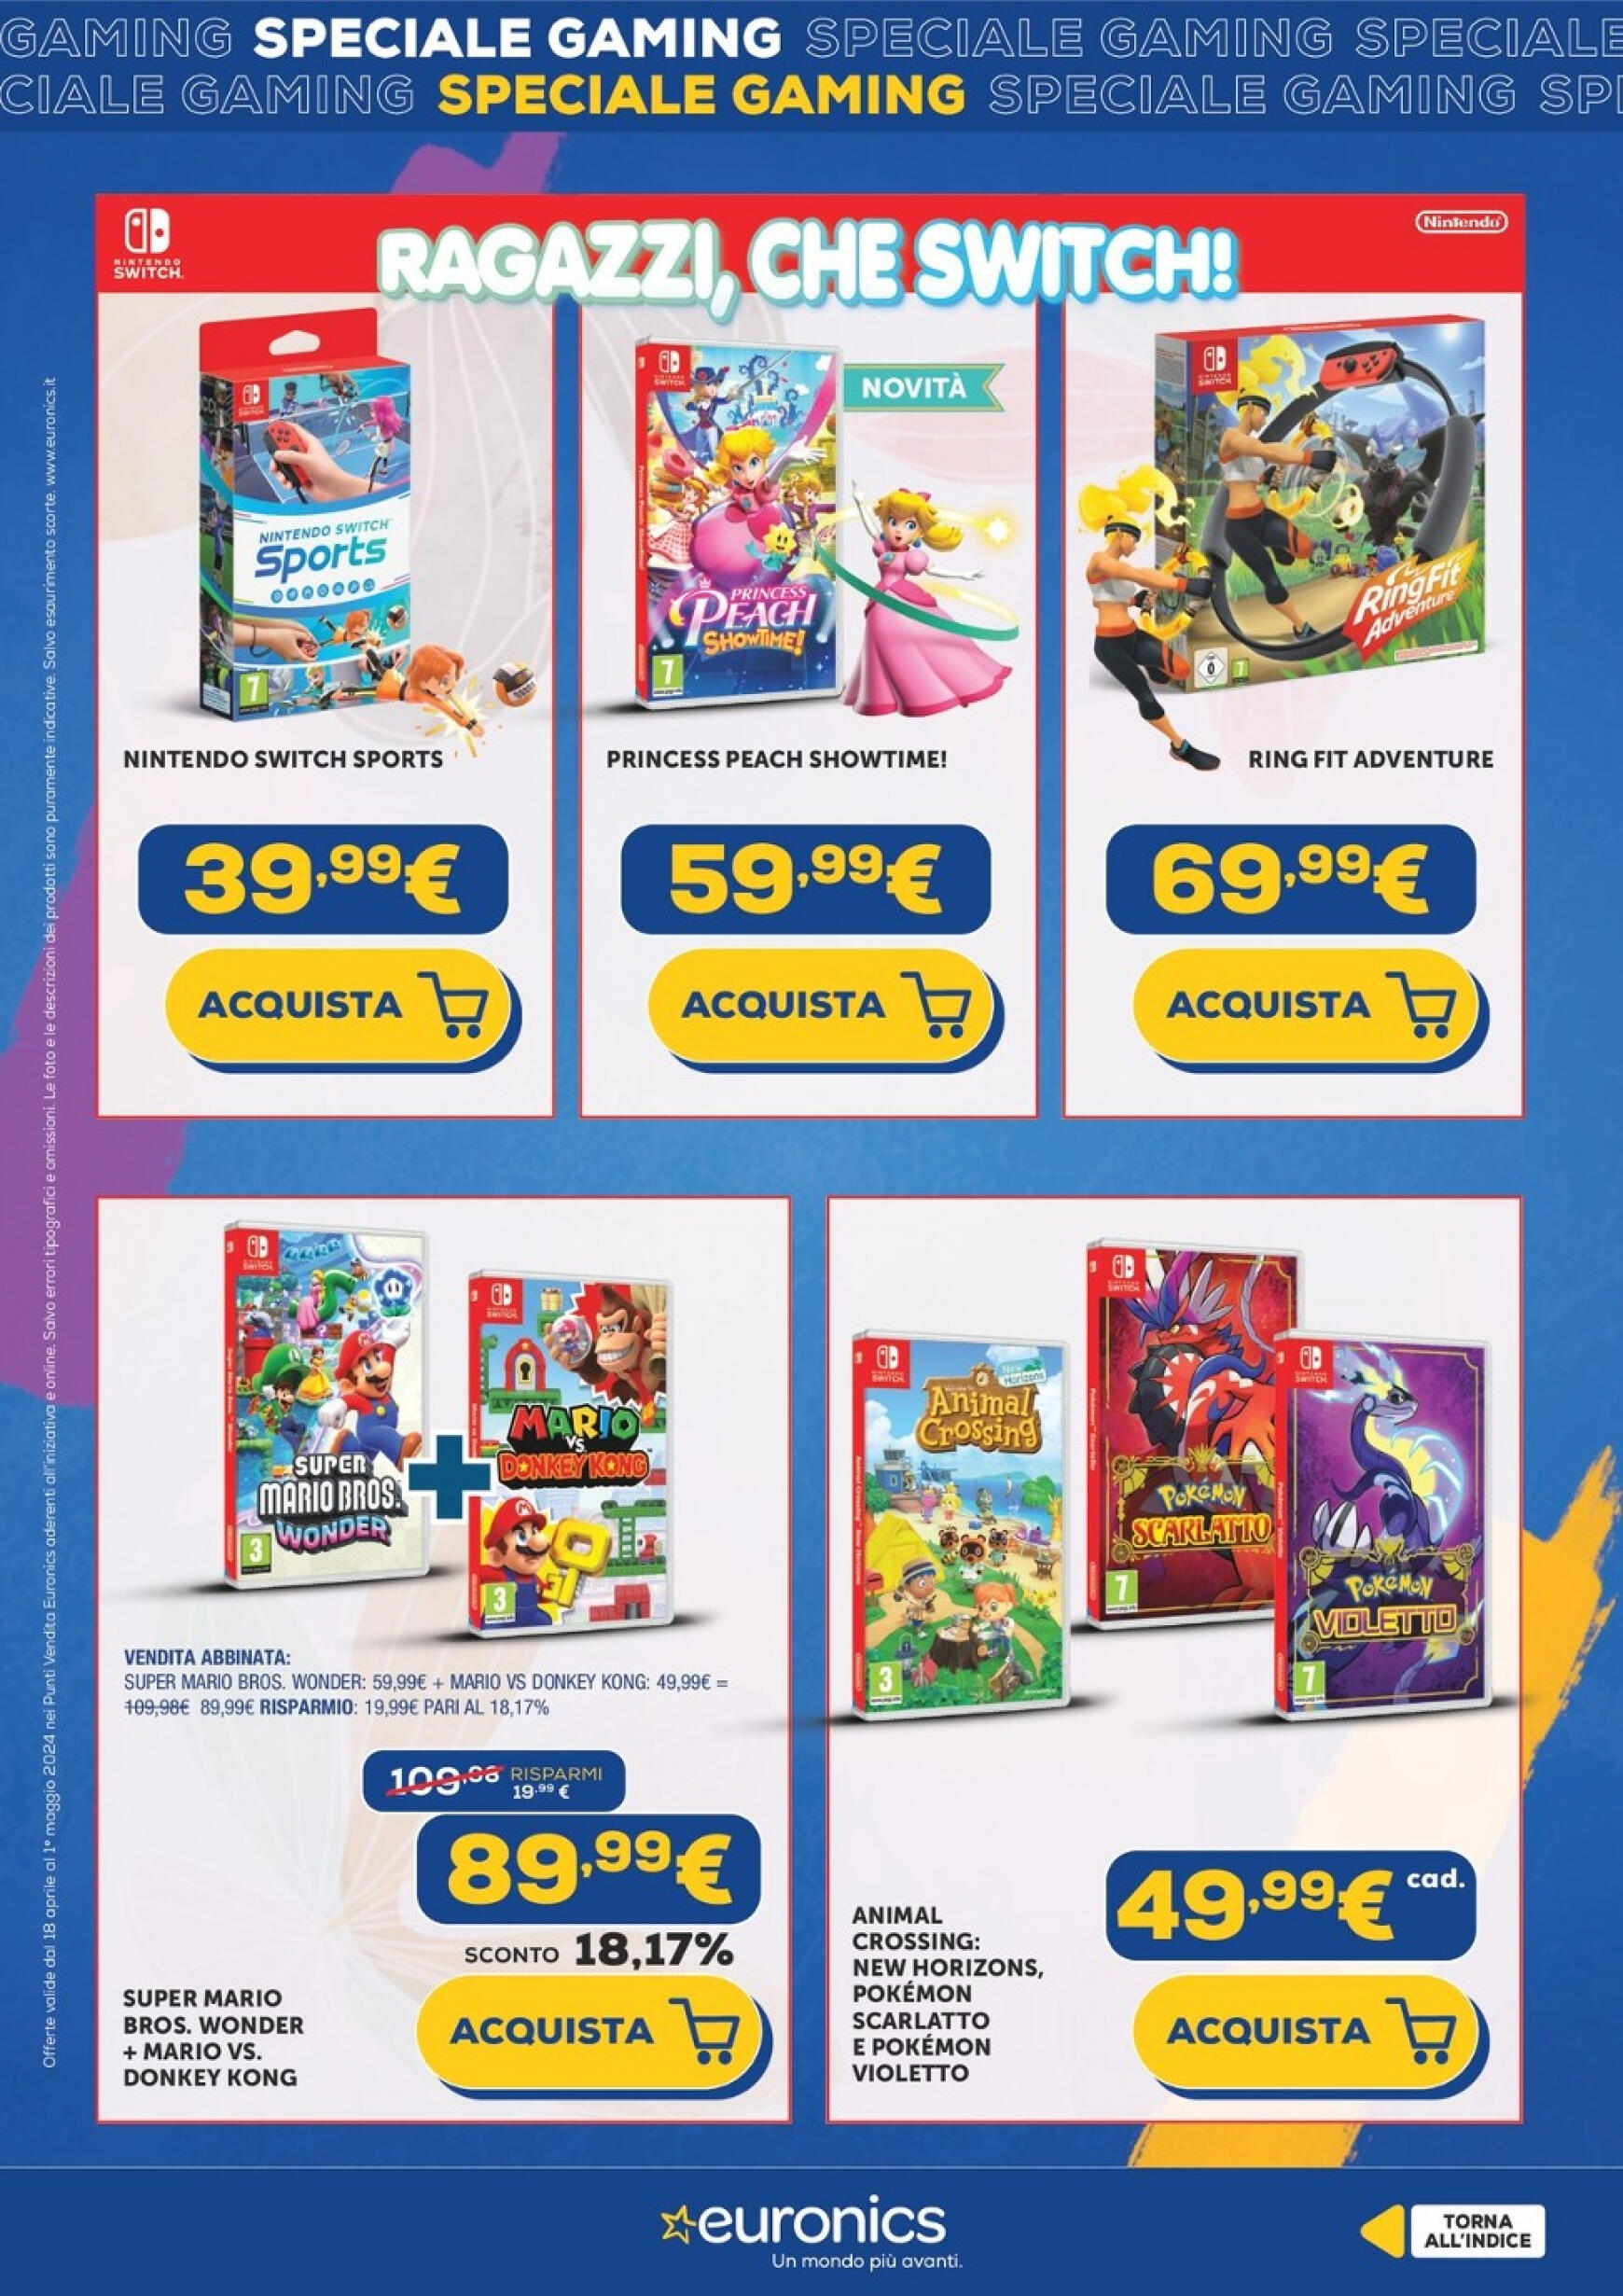 euronics - Nuovo volantino Euronics - Speciale Gaming 18.04. - 01.05. - page: 28